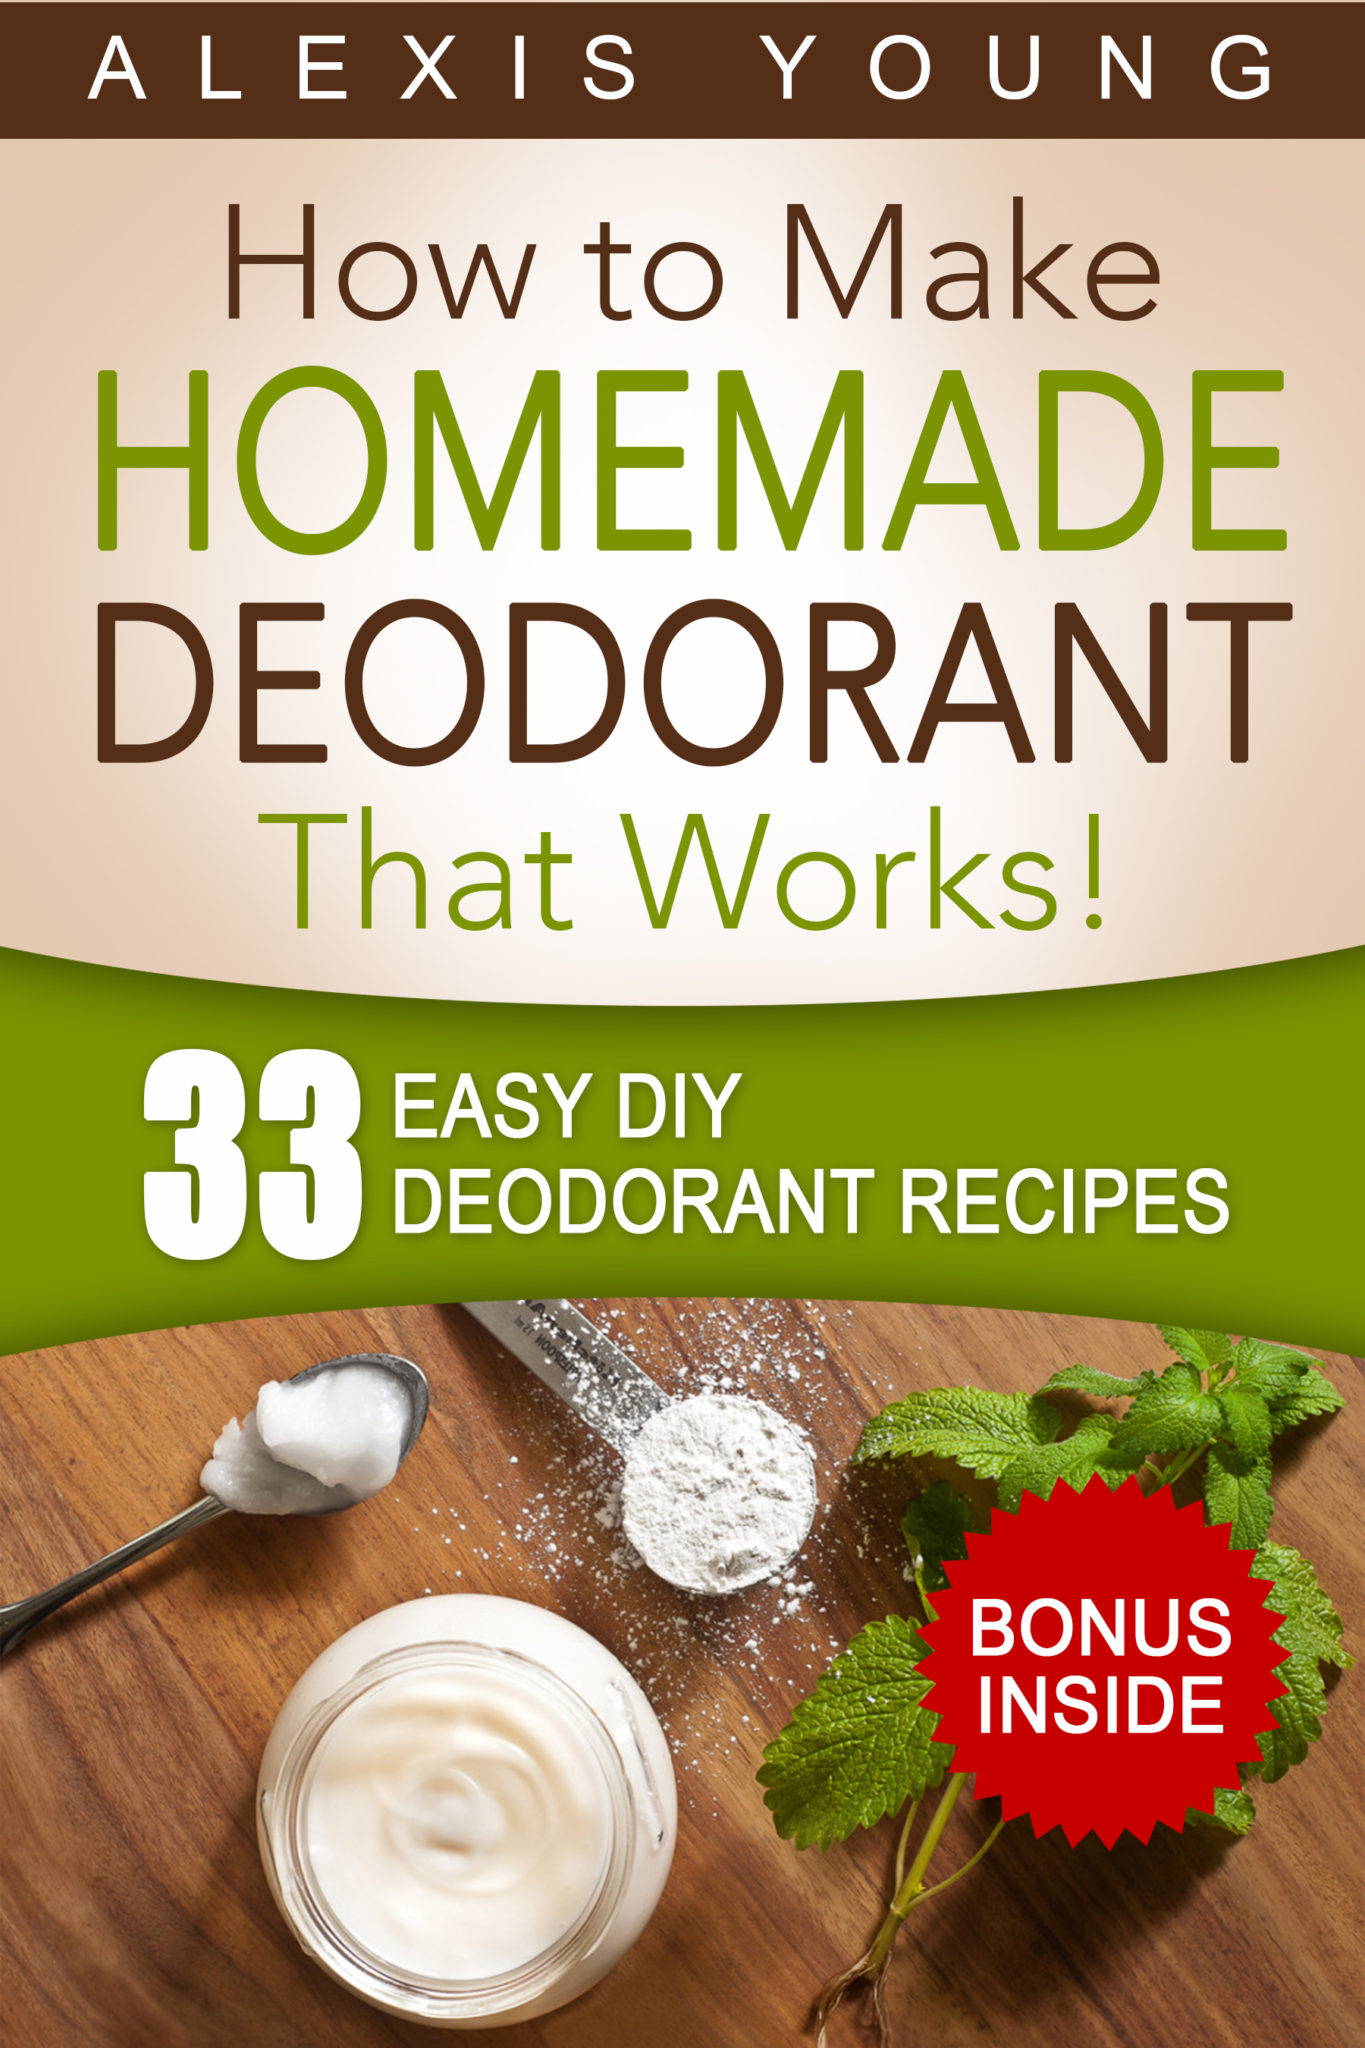 FREE: 33 Easy DIY Deodorant Recipes: for Staying Dry, Feeling Cool and Smelling Fresh by Alexis Young